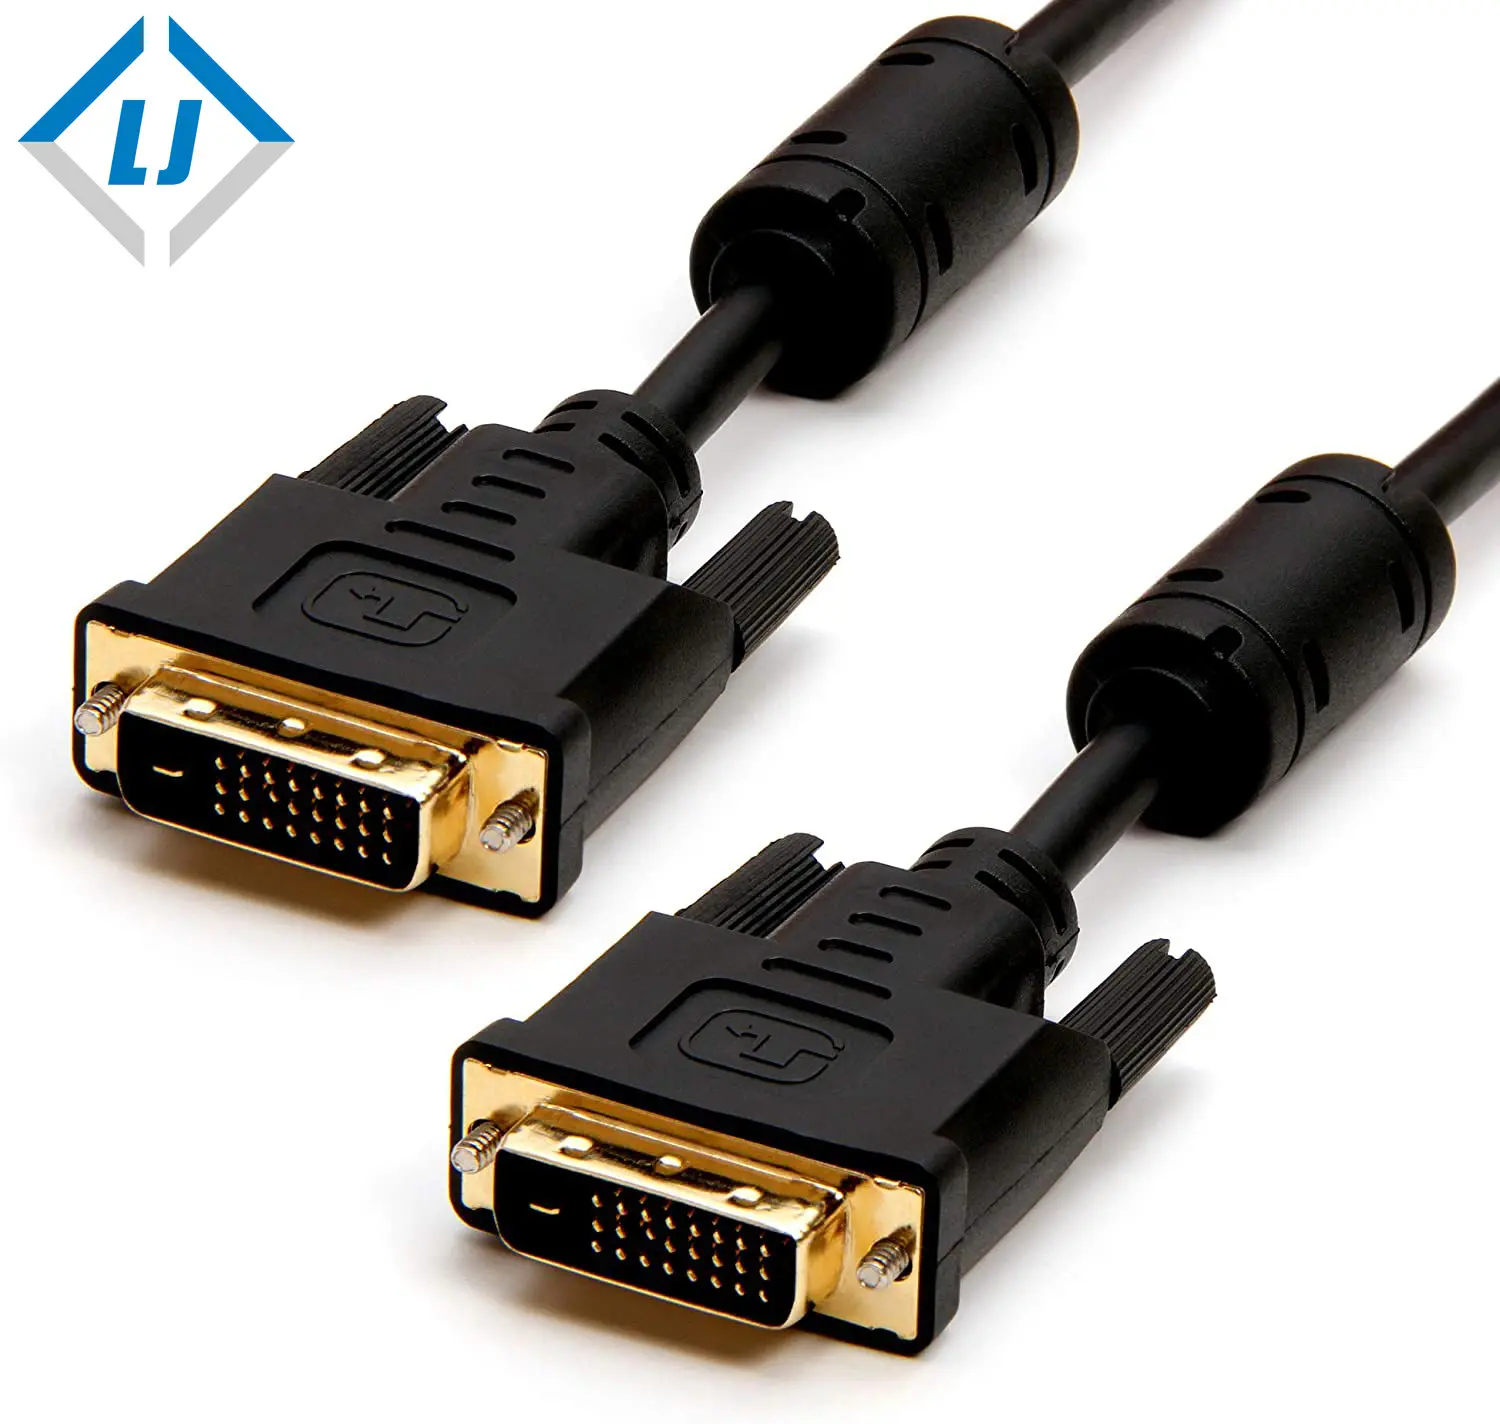 DVI-i Male to Male Video Cable DVI 24+5 Dual Link 1.8M High Speed DVI Cable